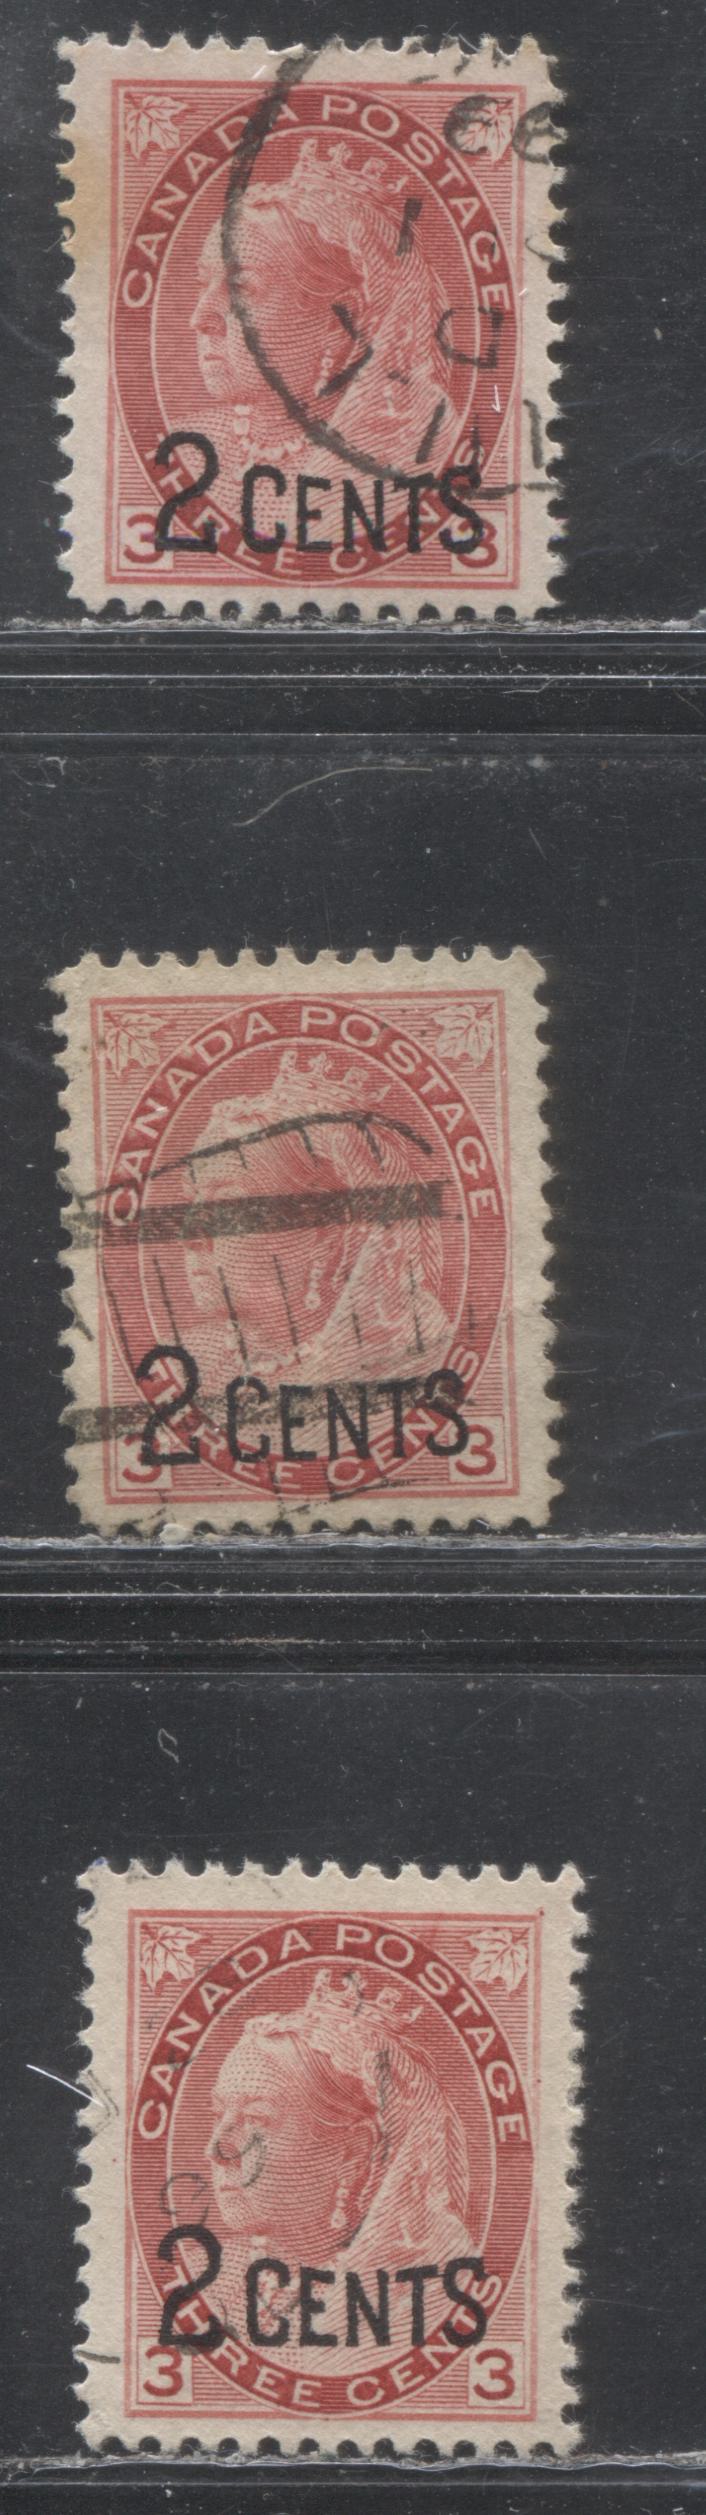 Lot 192 Canada #88 2c on 3c Deep Carmine Rose Queen Victoria, 1899 Provisional Issue, Three VF CDS Used Examples, Each With Different Unlisted Plate Marking or Flaw